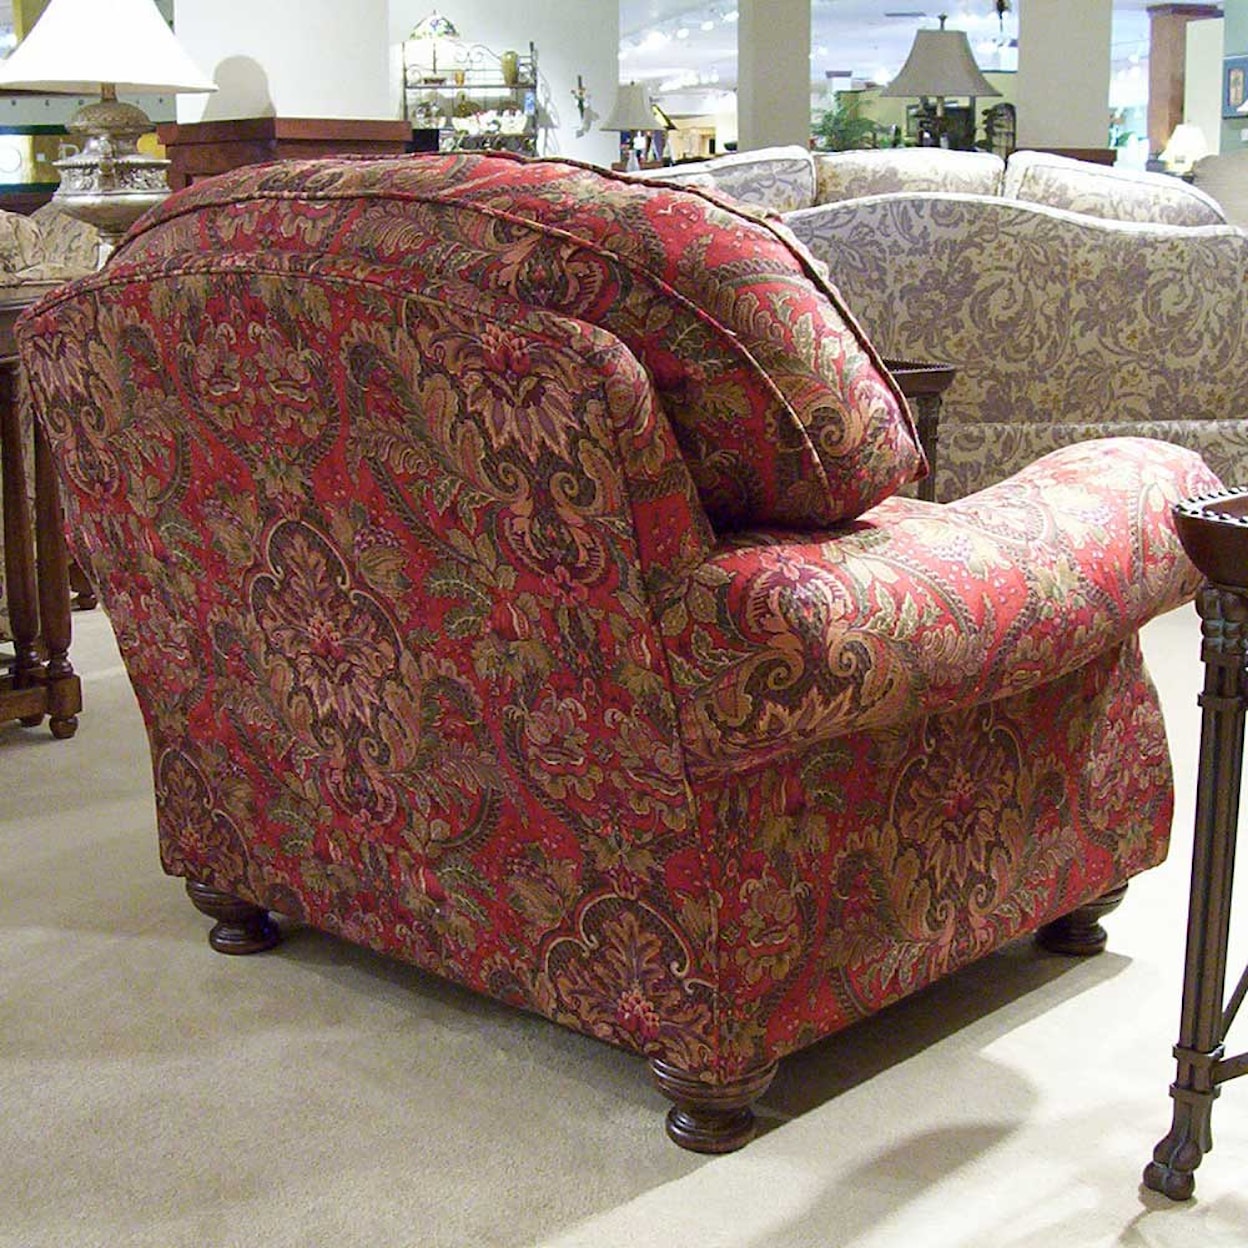 King Hickory 9000 45" Semi-Attached Back Chair